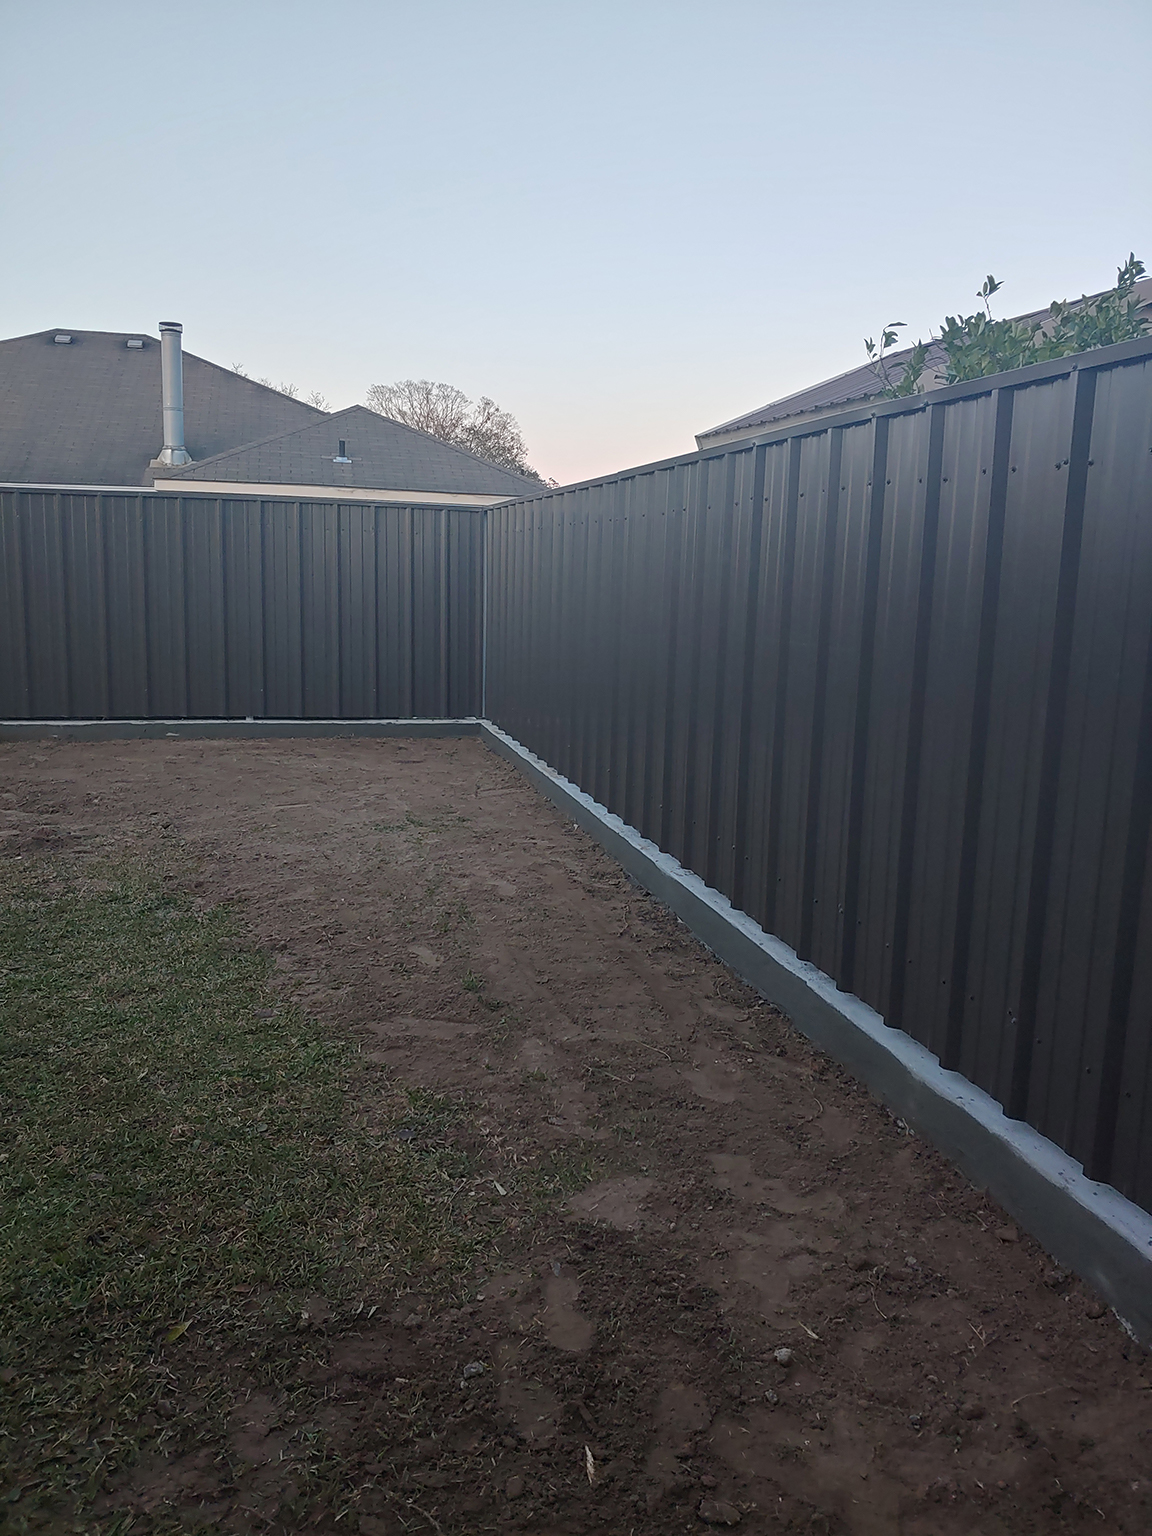 Burnished Slate R Panels used to create this fence in the New Orleans area.